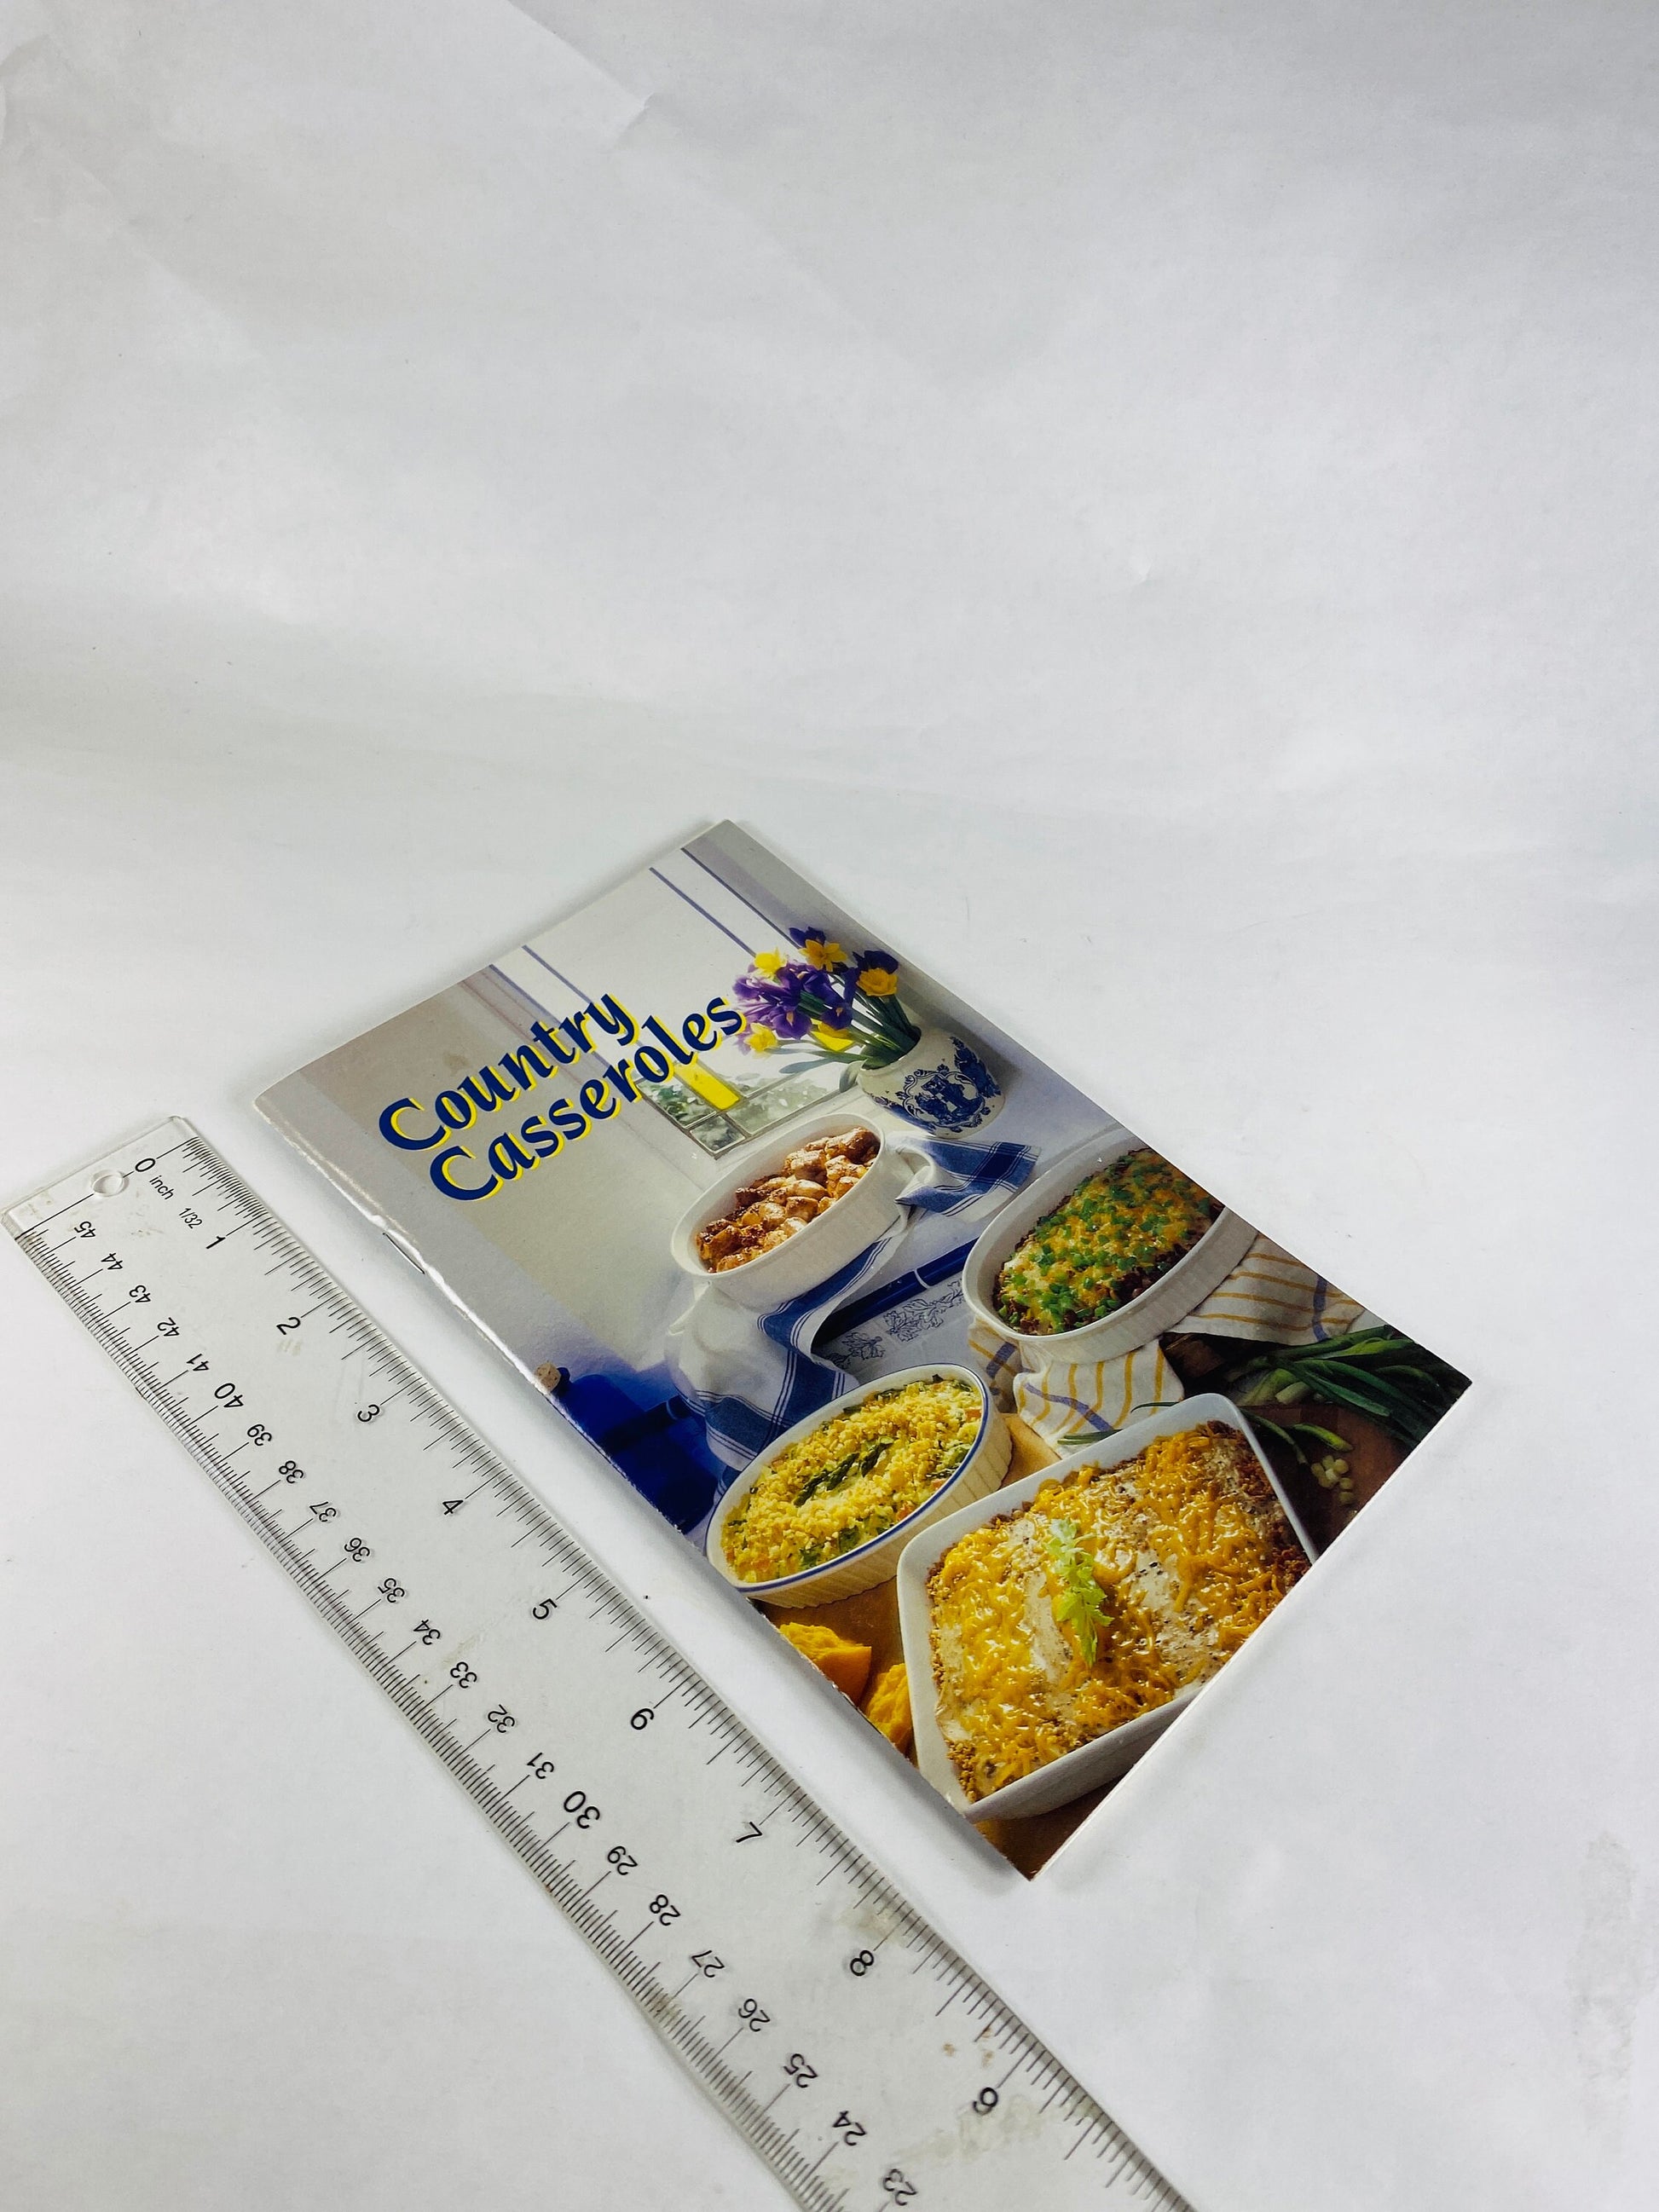 Country Casseroles Vintage cookbook booklet with unusual and traditional breakfast brunch, main and side dish recipes Egg Souffle seafood